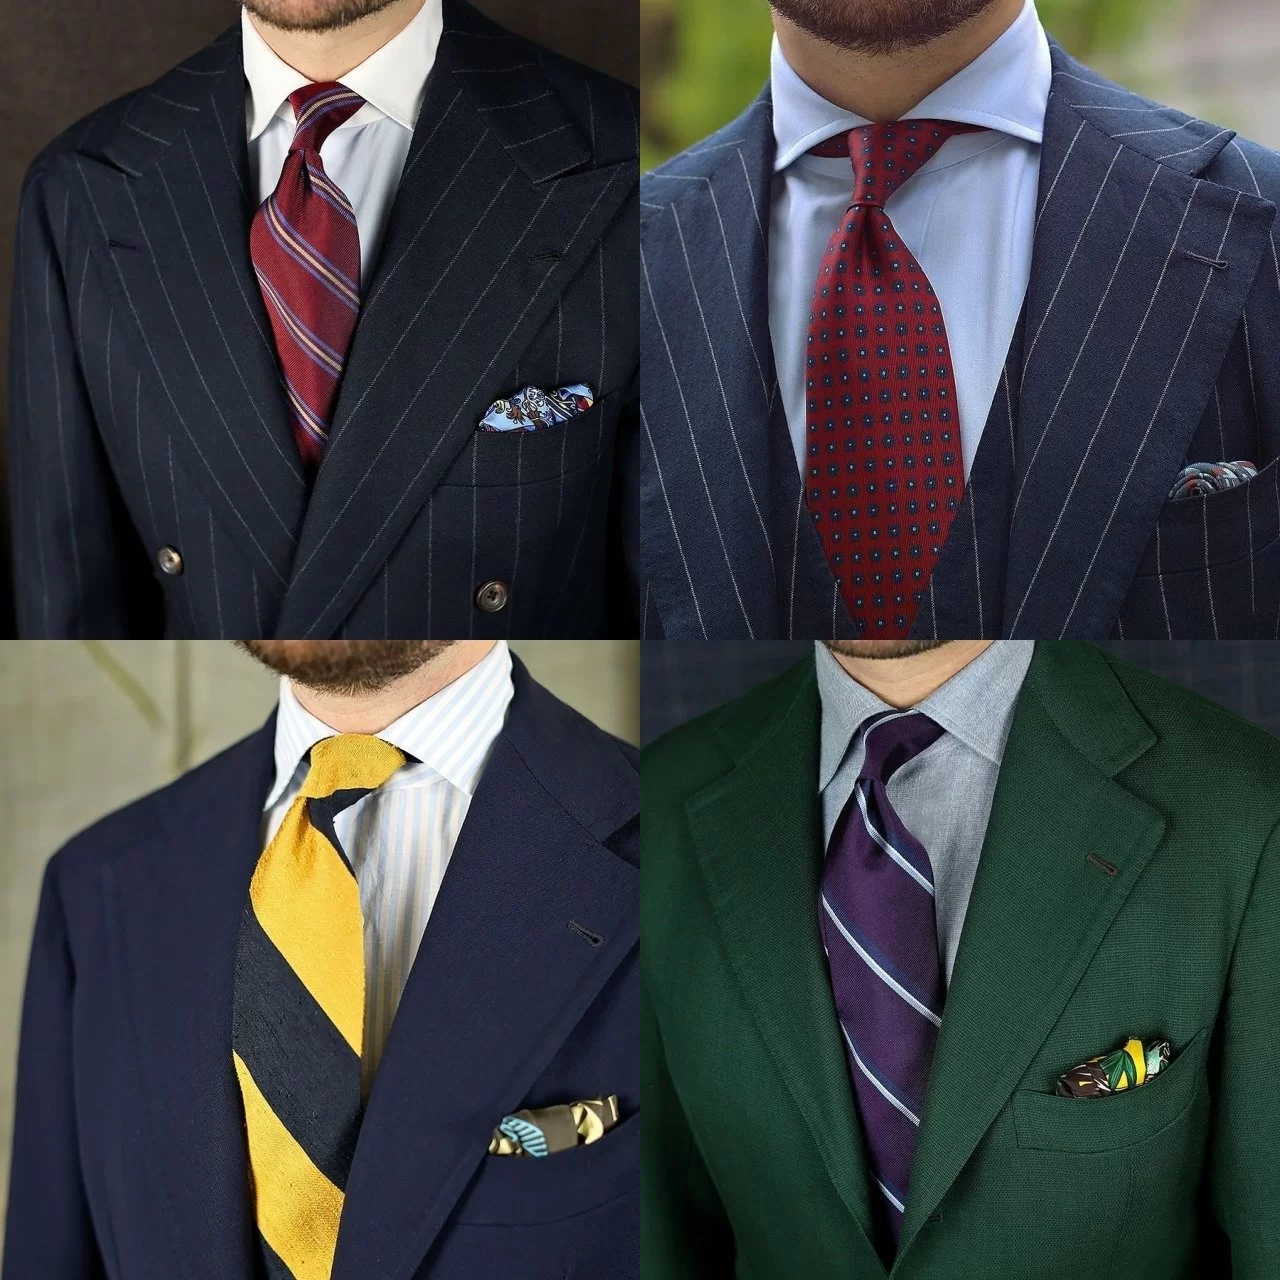 How to match a tie to shirt and suit or blazer - triadic colors